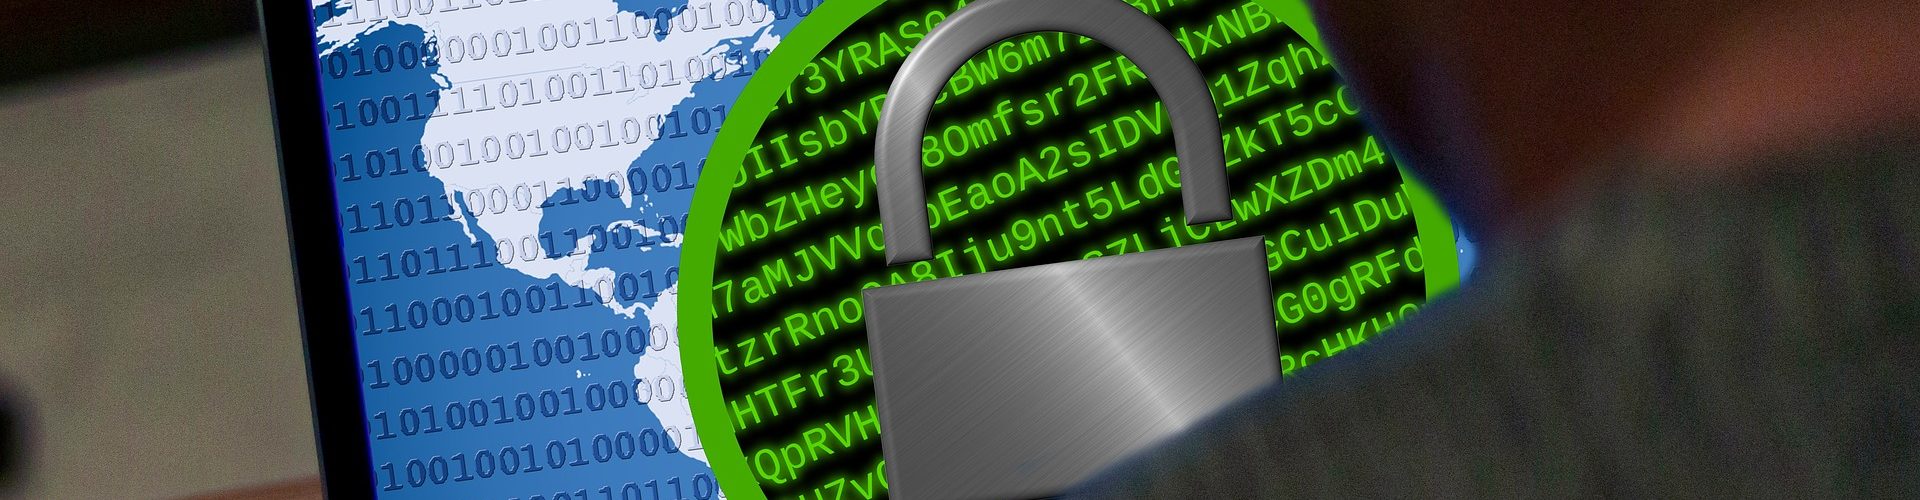 Over $1m paid to ransomware hackers by two US towns